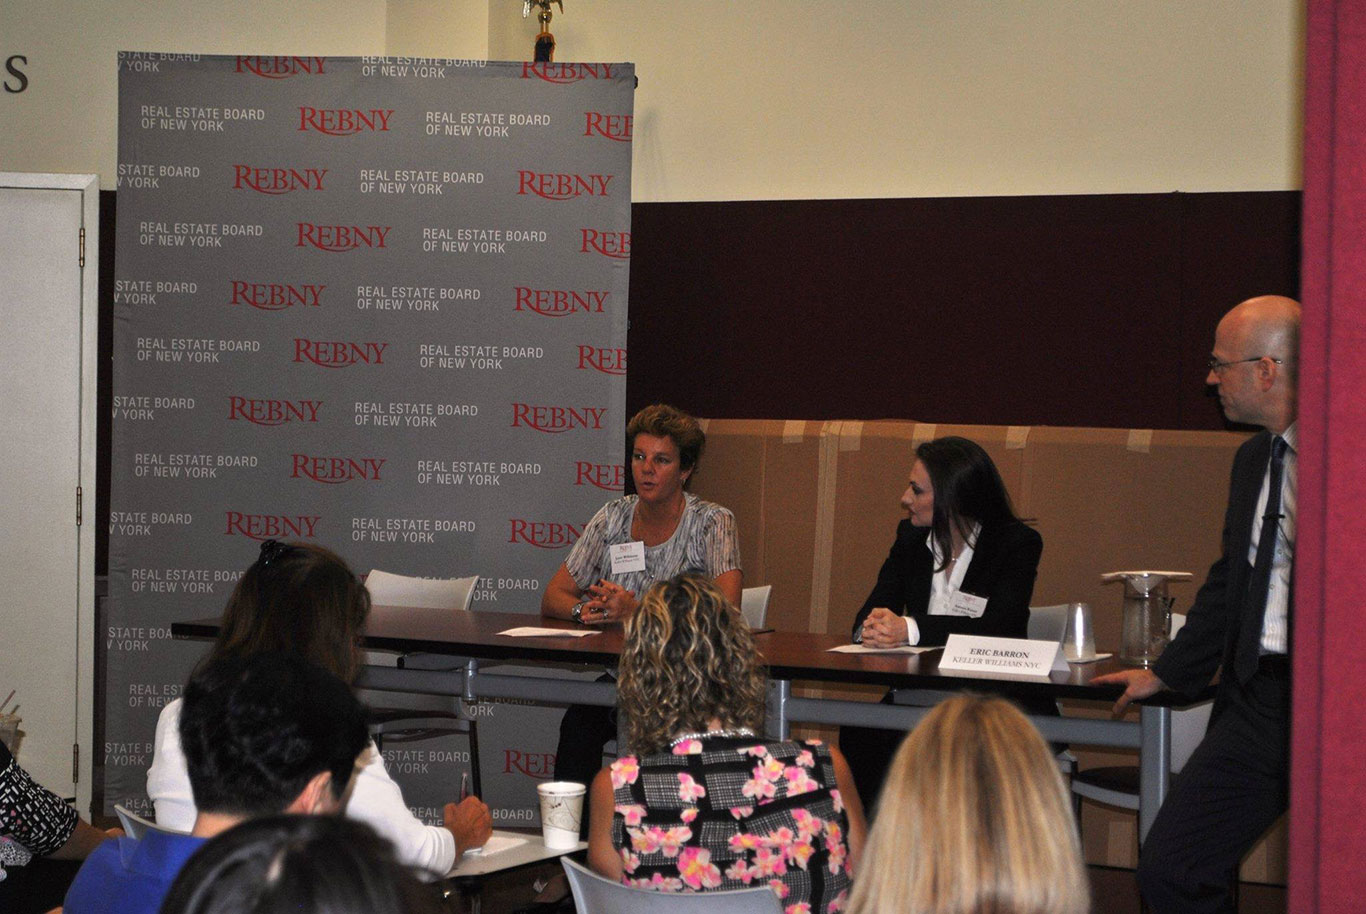 Antonia Watson Speaks on Panel for the Real Estate Board of New York (REBNY)